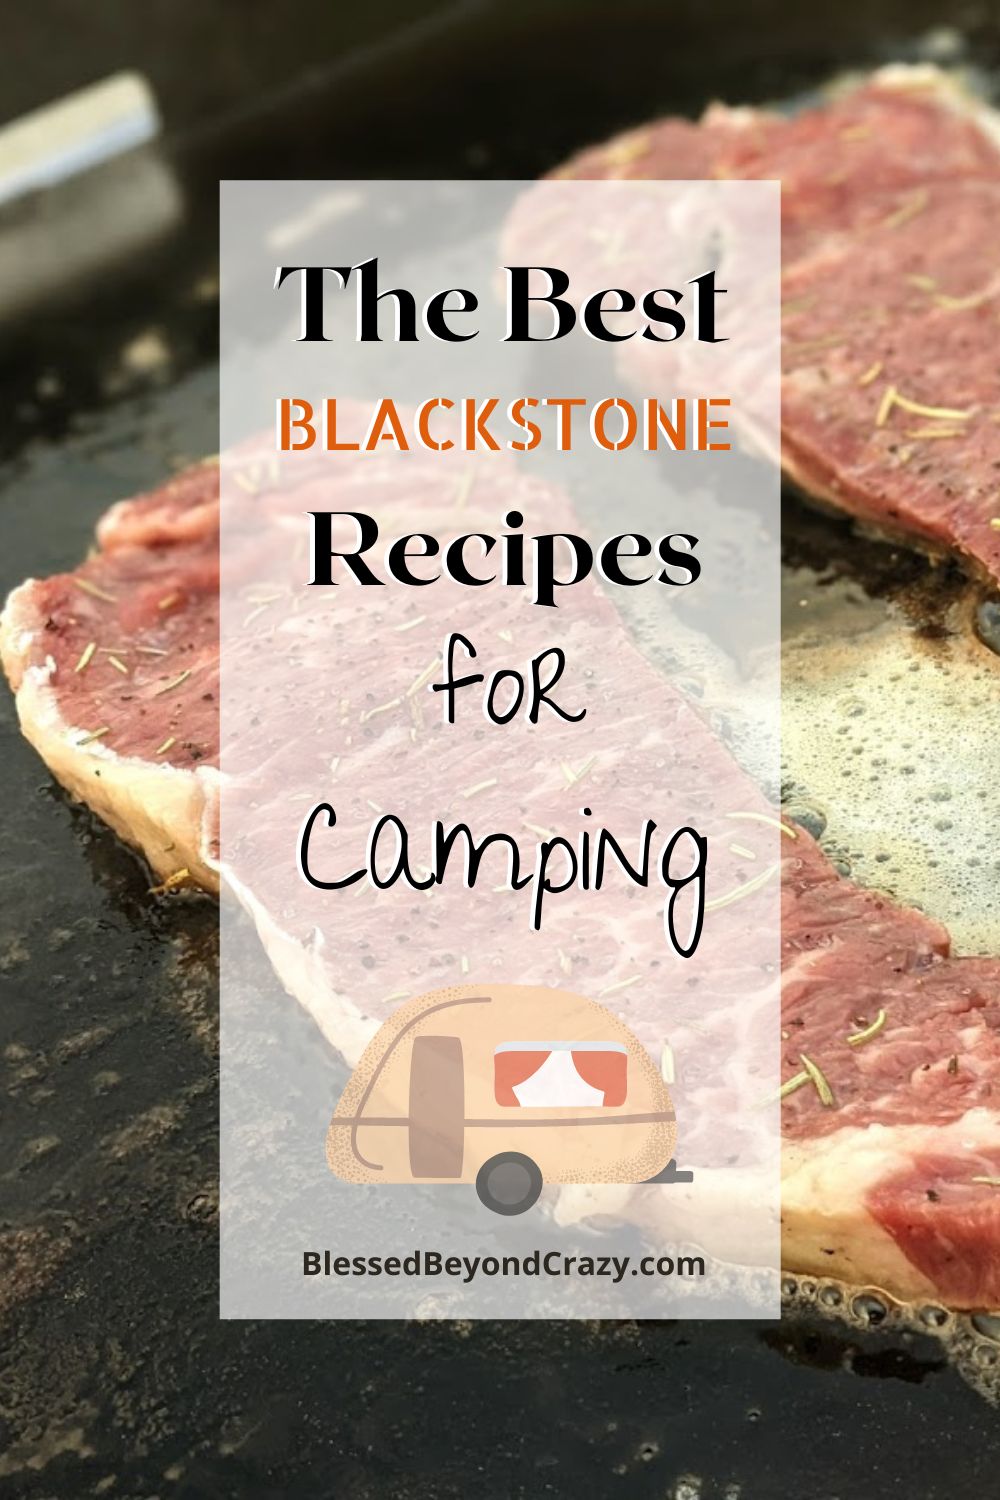 The Best Blackstone Griddles for Camping